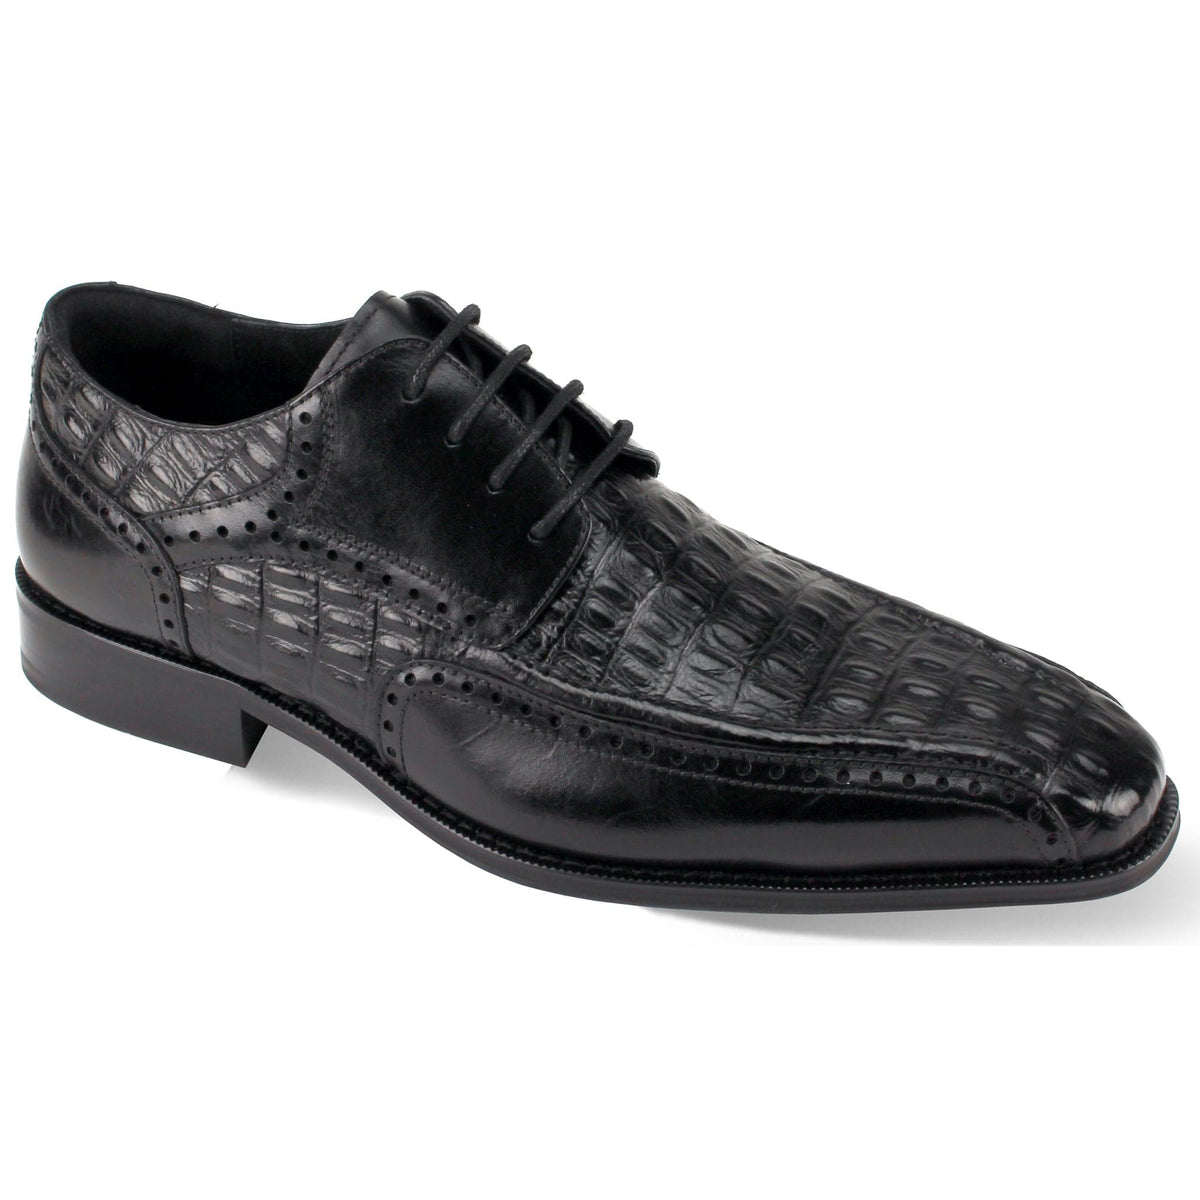 GIOVANNI LEATHER SHOES FT BLACK / 7 GIOVANNI LEATHER SHOES-MILFORD